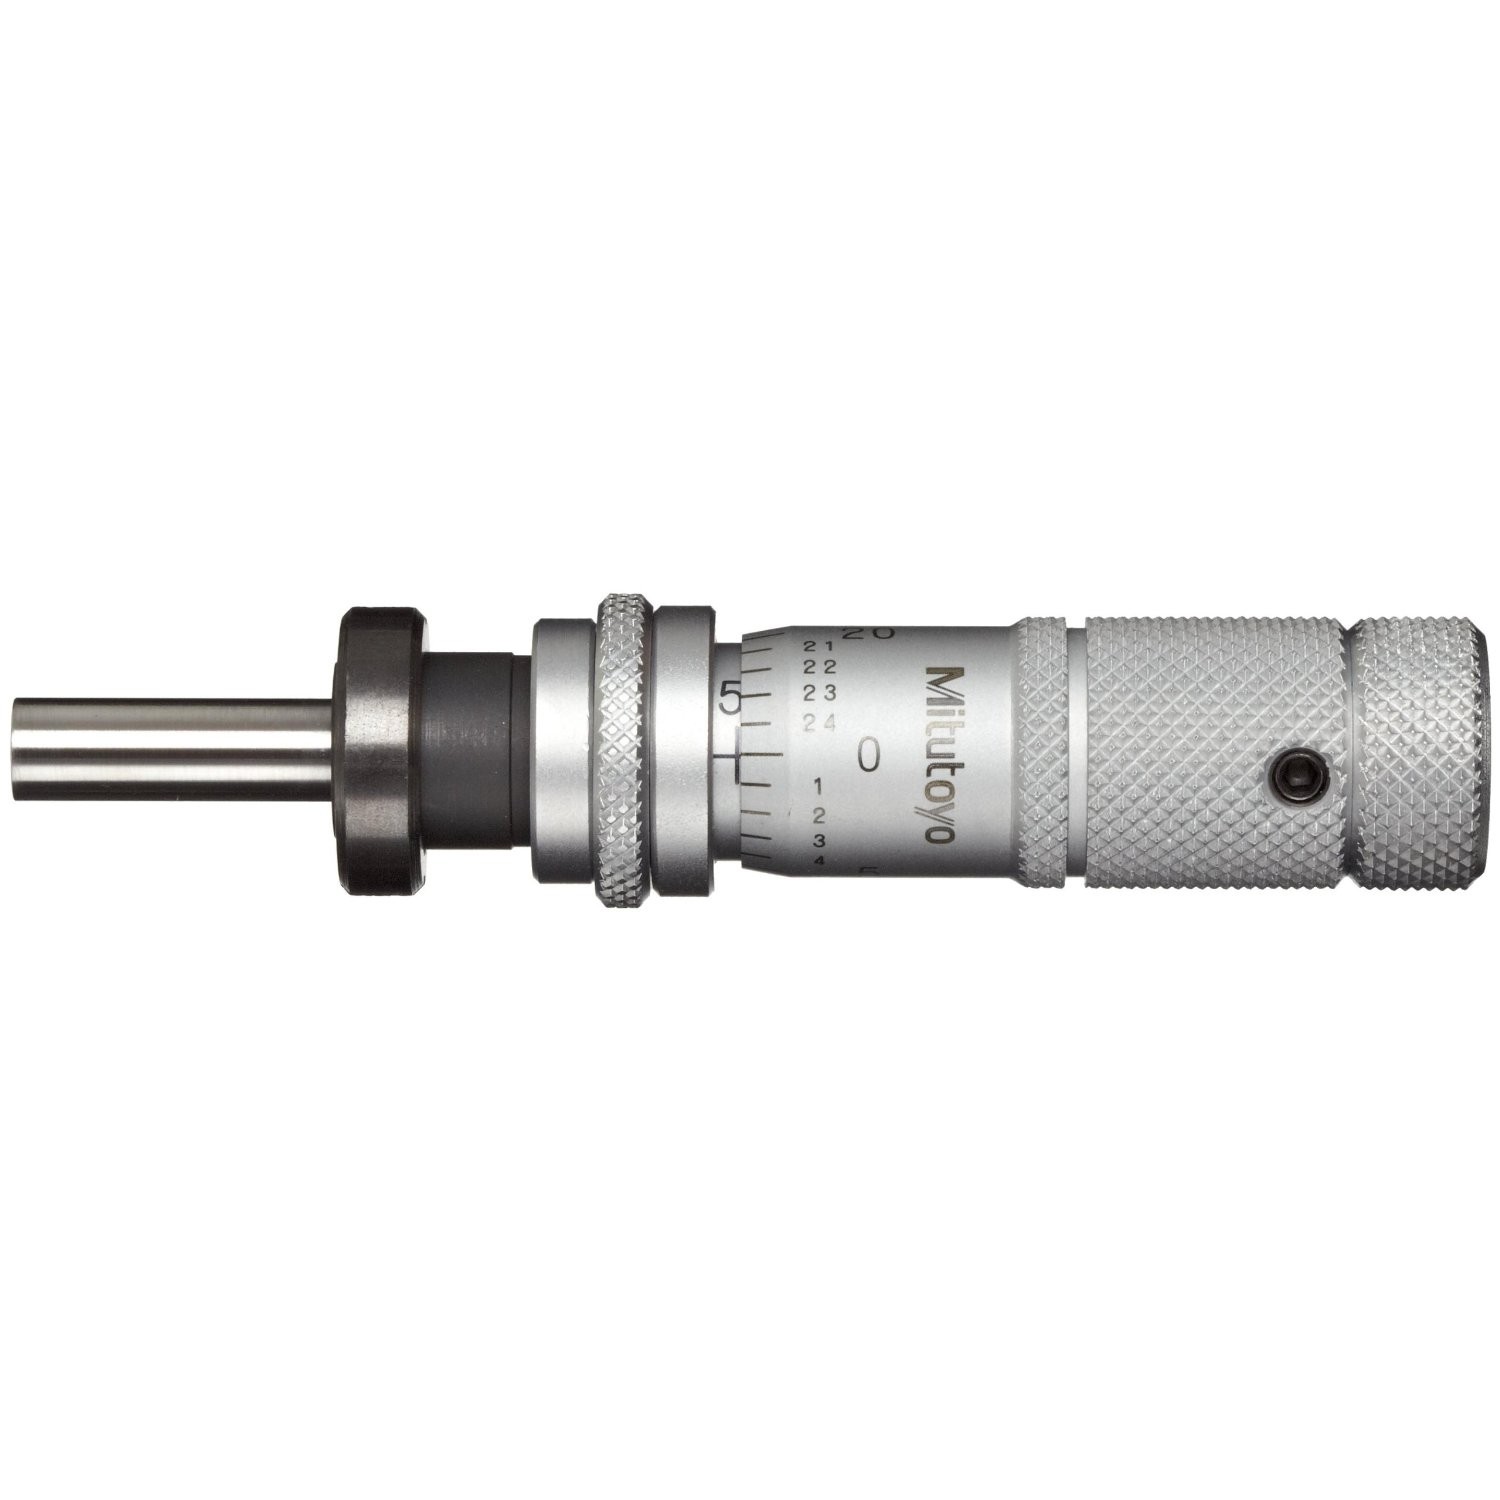 Mitutoyo 193-212 Digit Outside Micrometer +/-0.0001 Accuracy 1-2 Range Friction Thimble 0.0001 Graduation